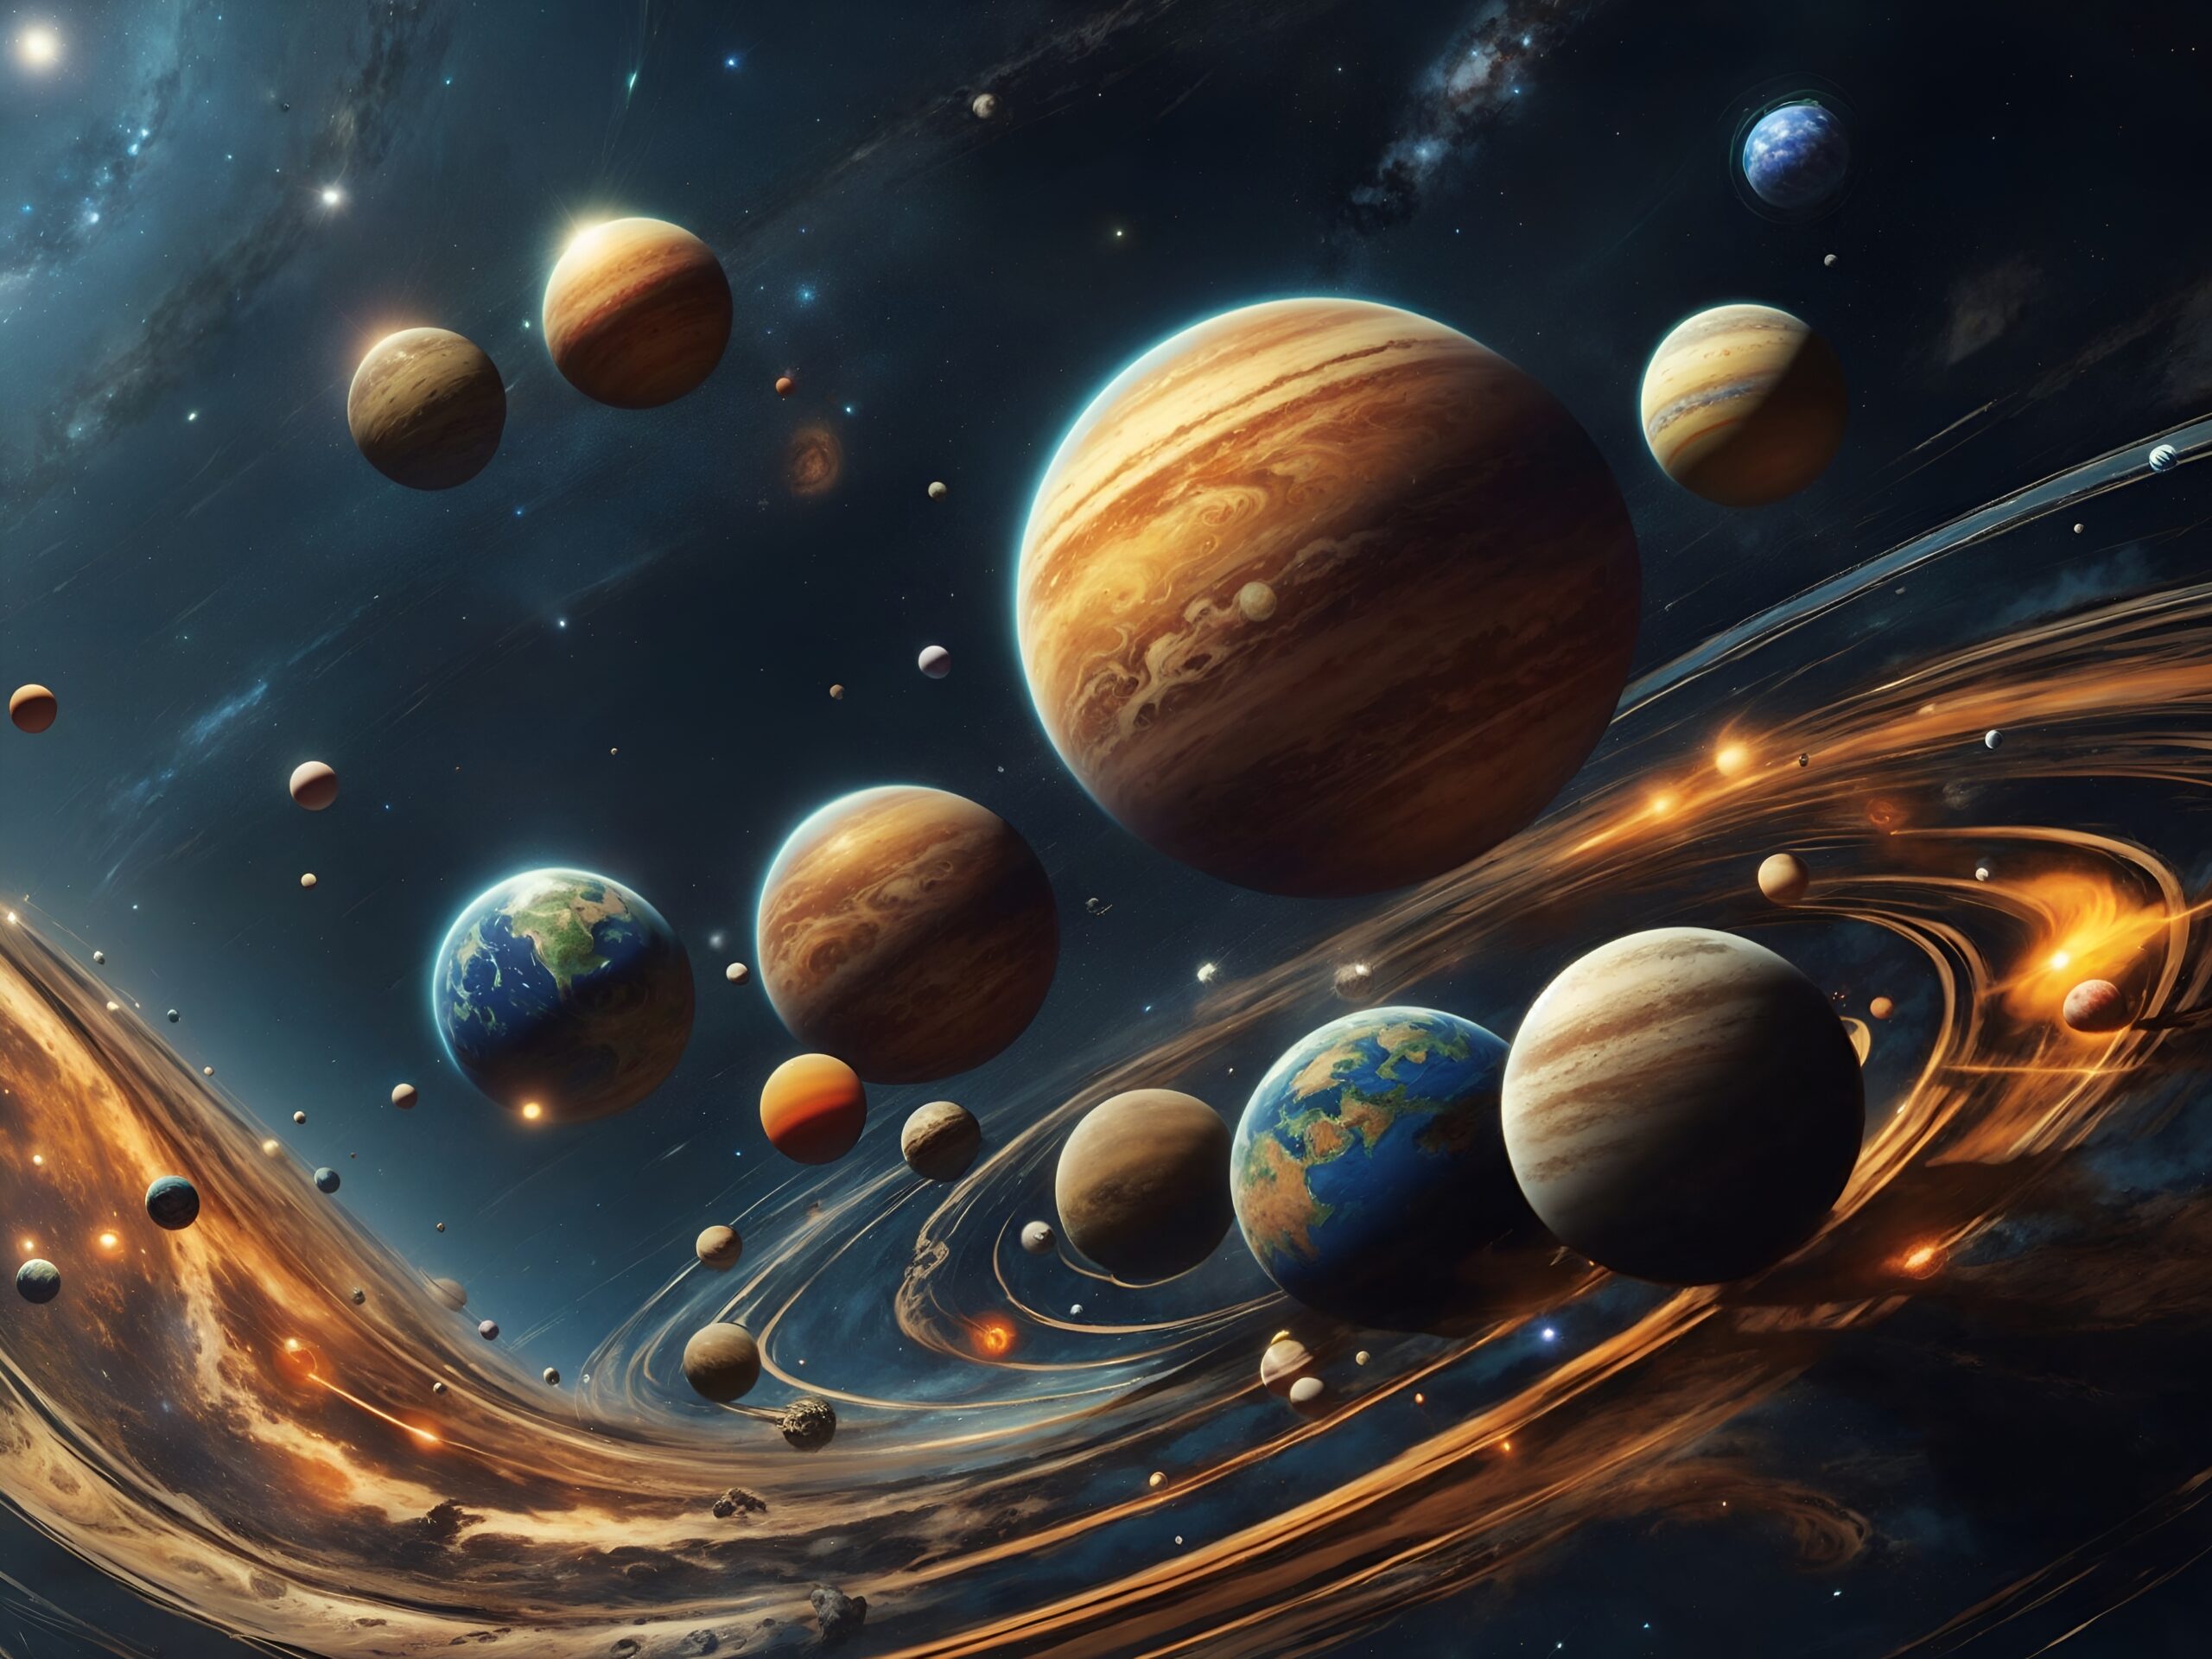 SURREAL IMAGE OF THE PLANETS IN THE SOLAR SYSTEM DANCING